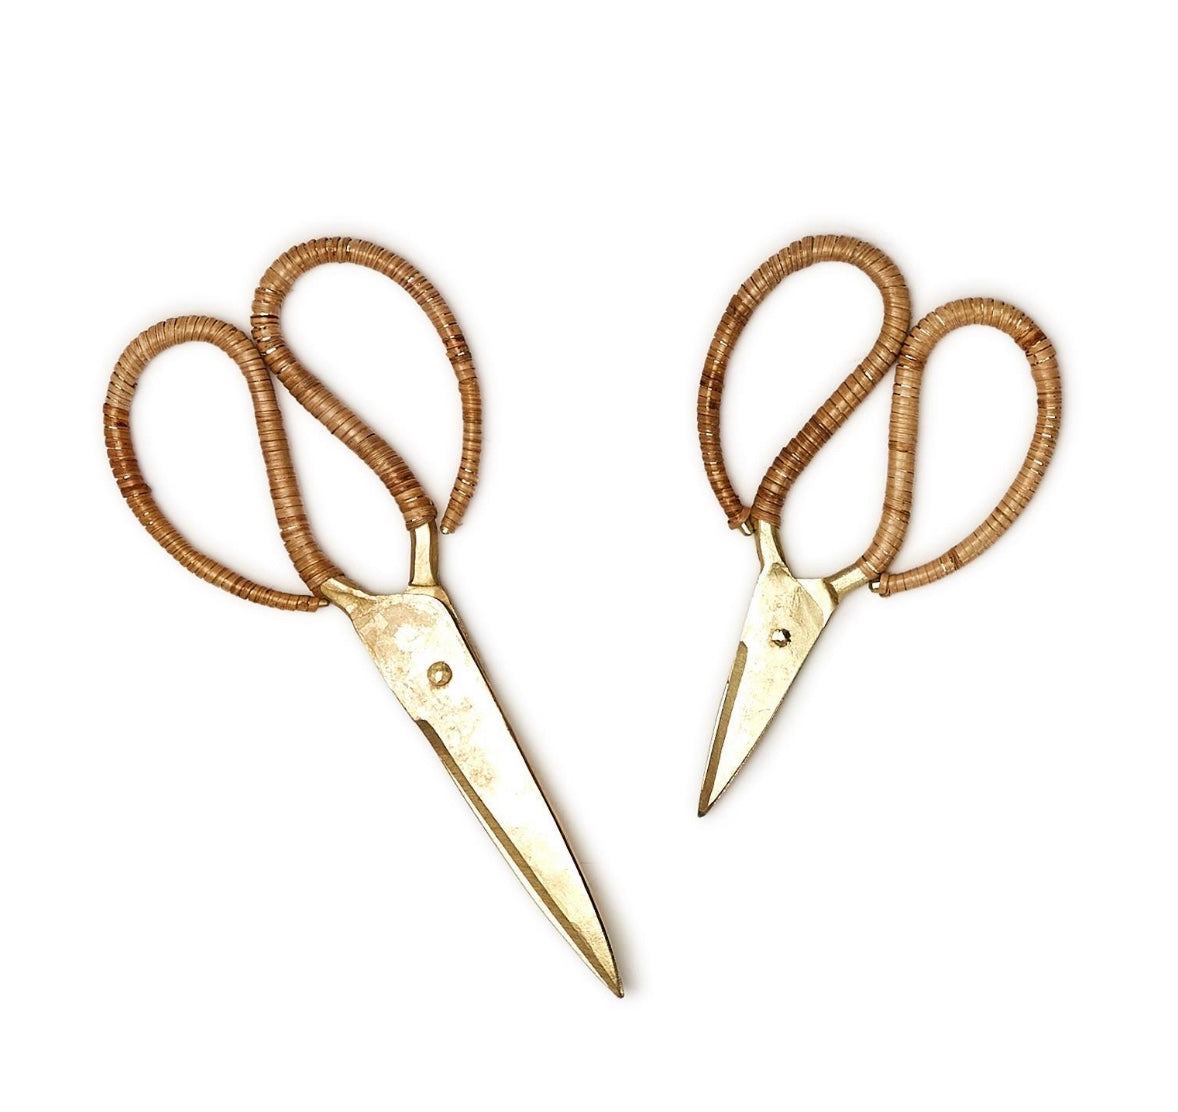 Cane Wrapped Scissors - 2 sizes